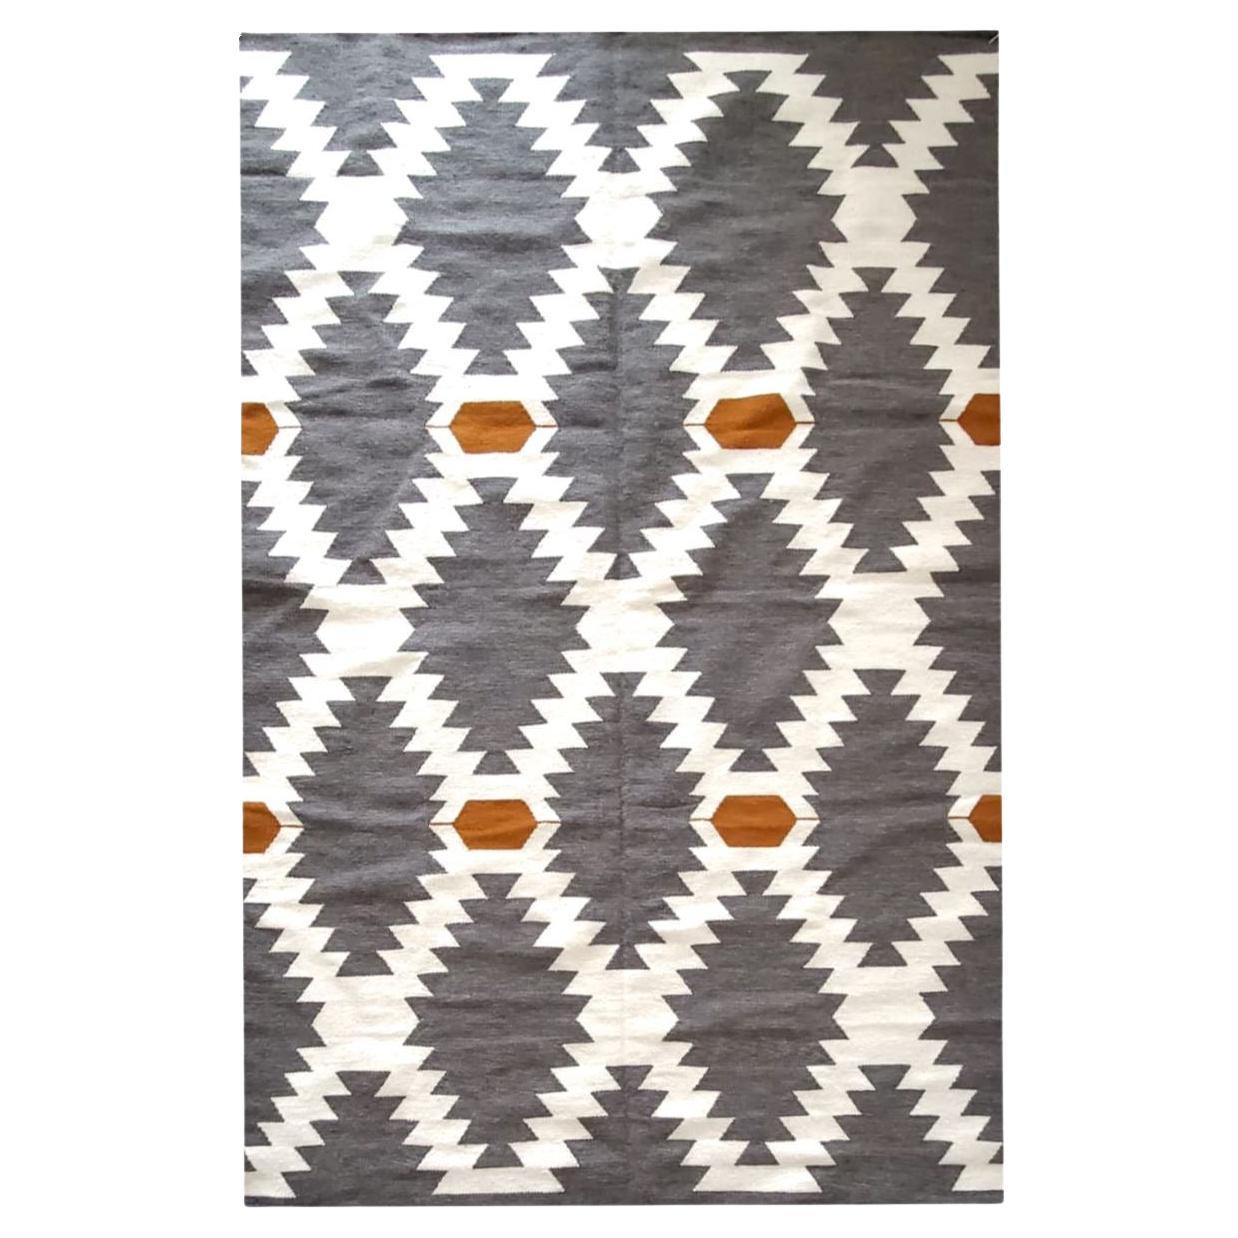 Tanned Gray, Cream, and Brown Beni Handwoven Kilim |  Living Room Area Rug For Sale